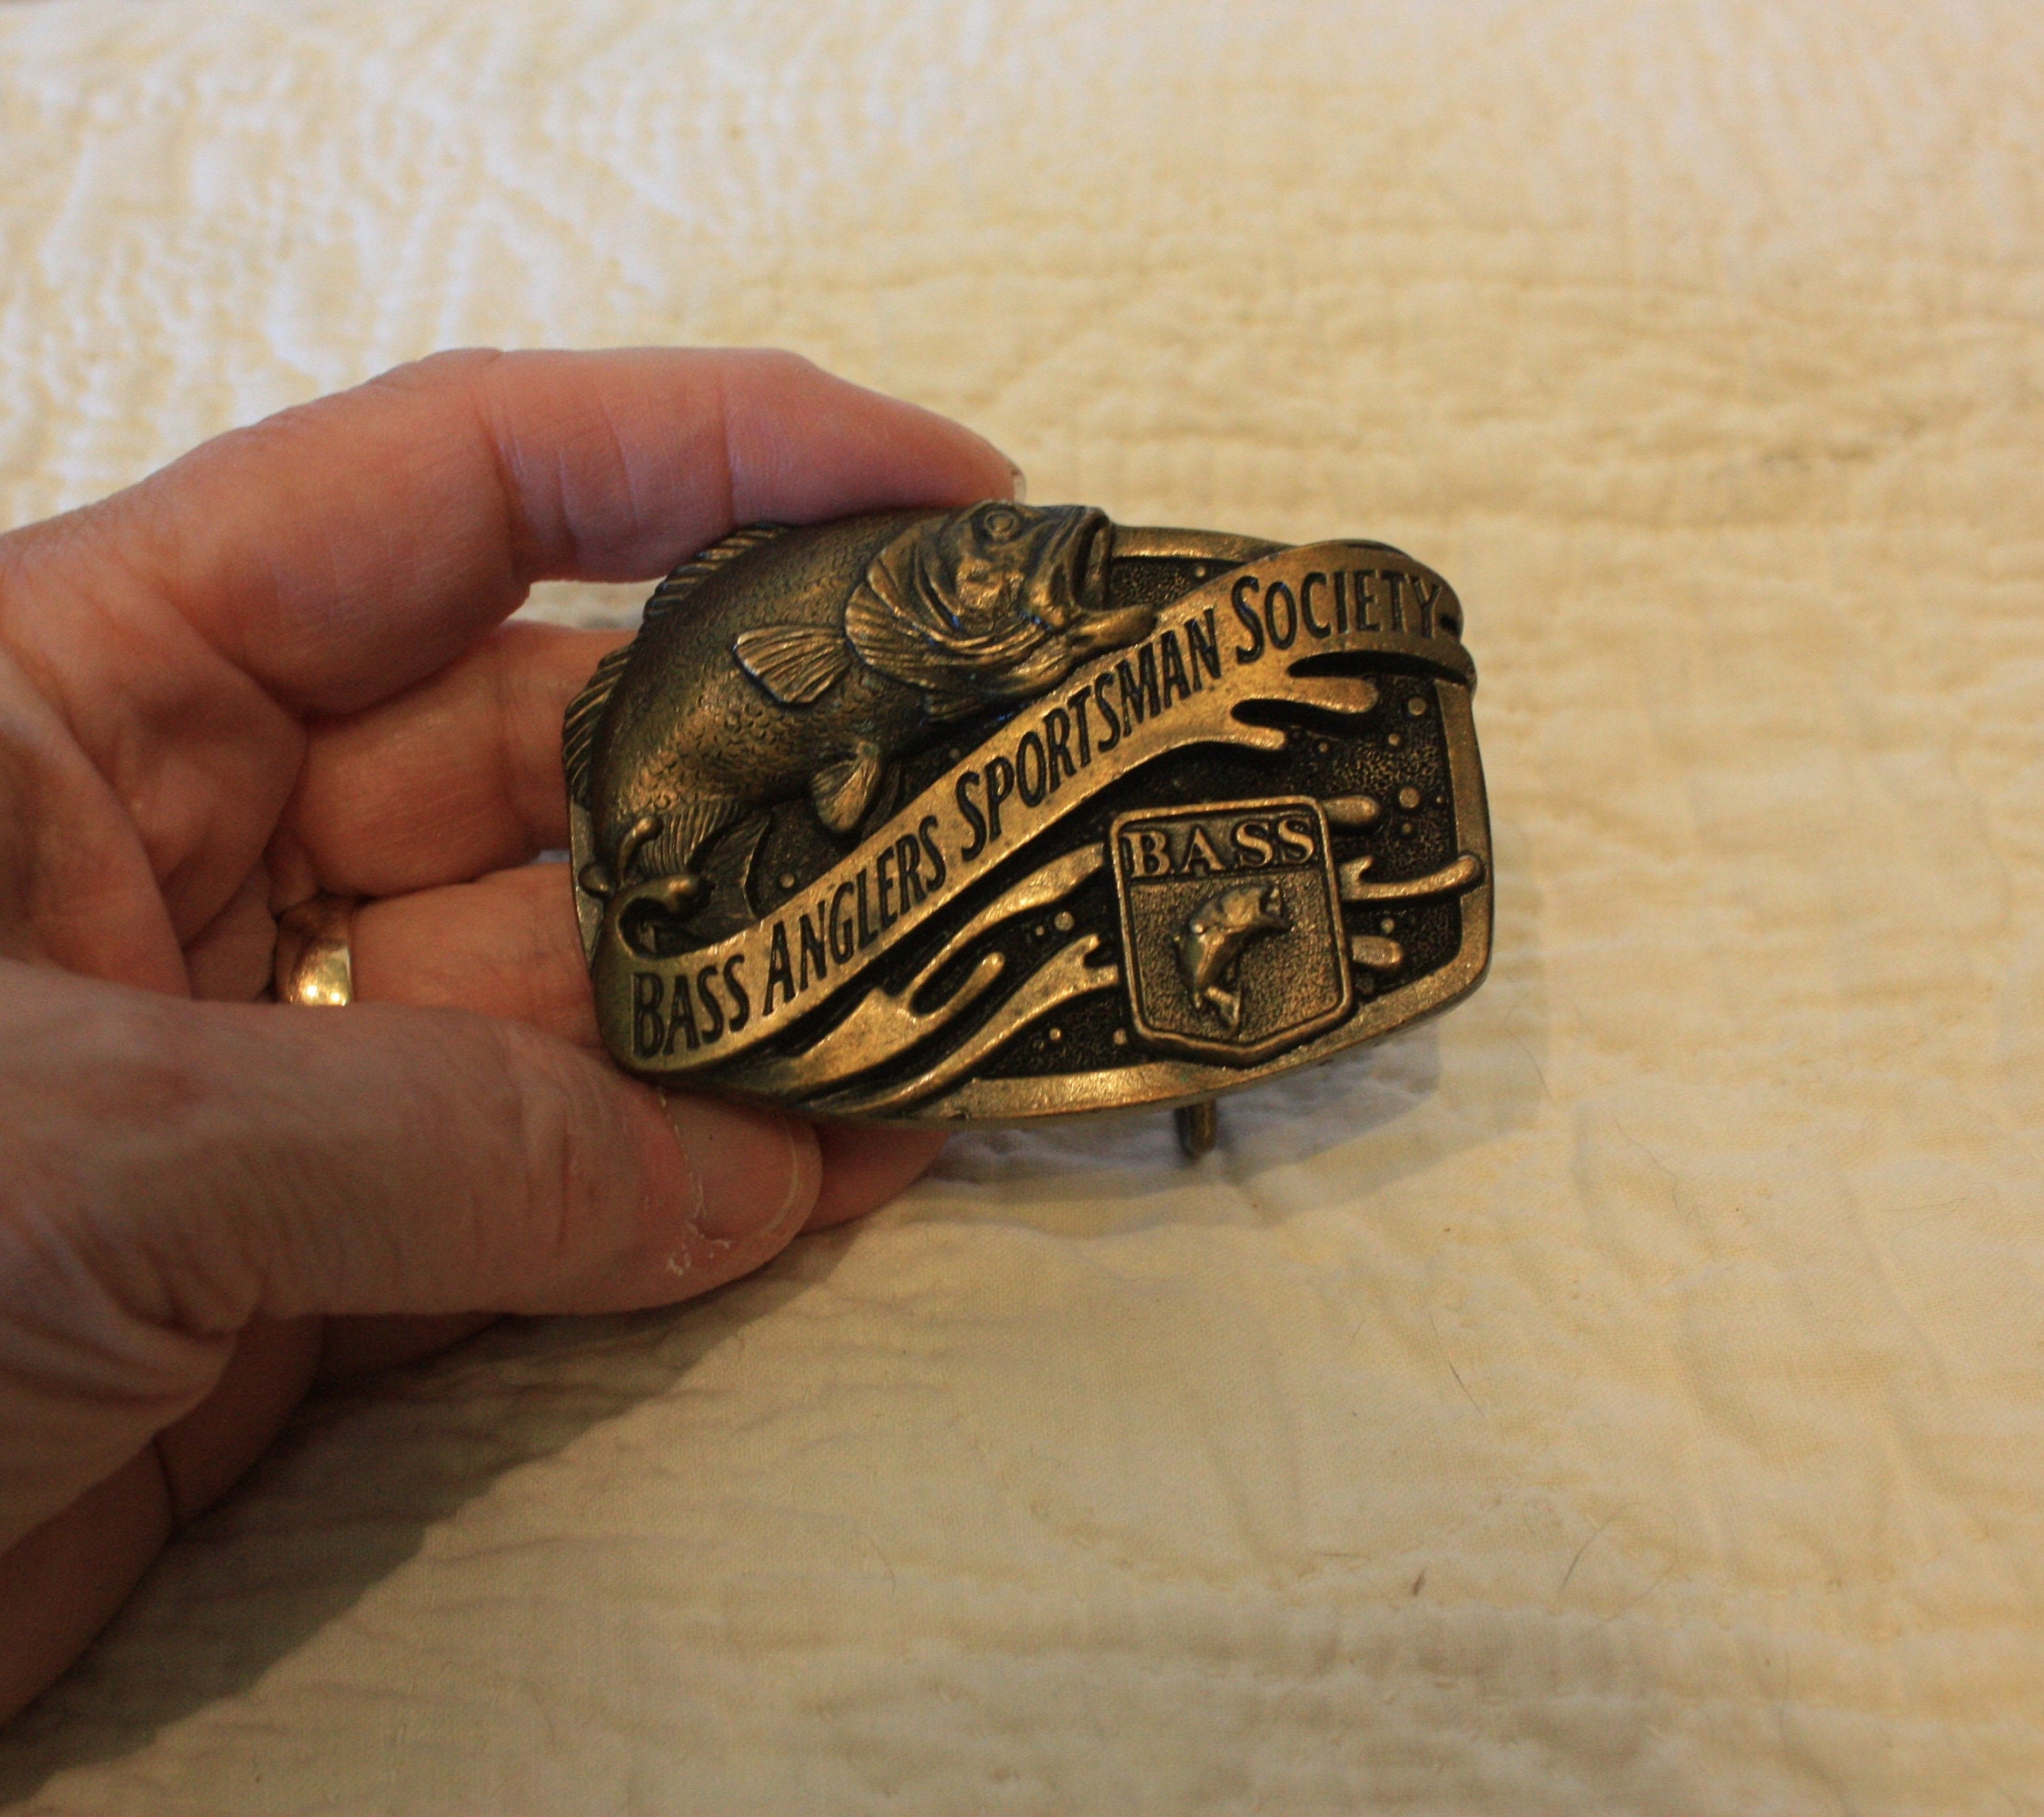 Vintage Bass Anglers Sportsman Society Belt Buckle Made in USA 